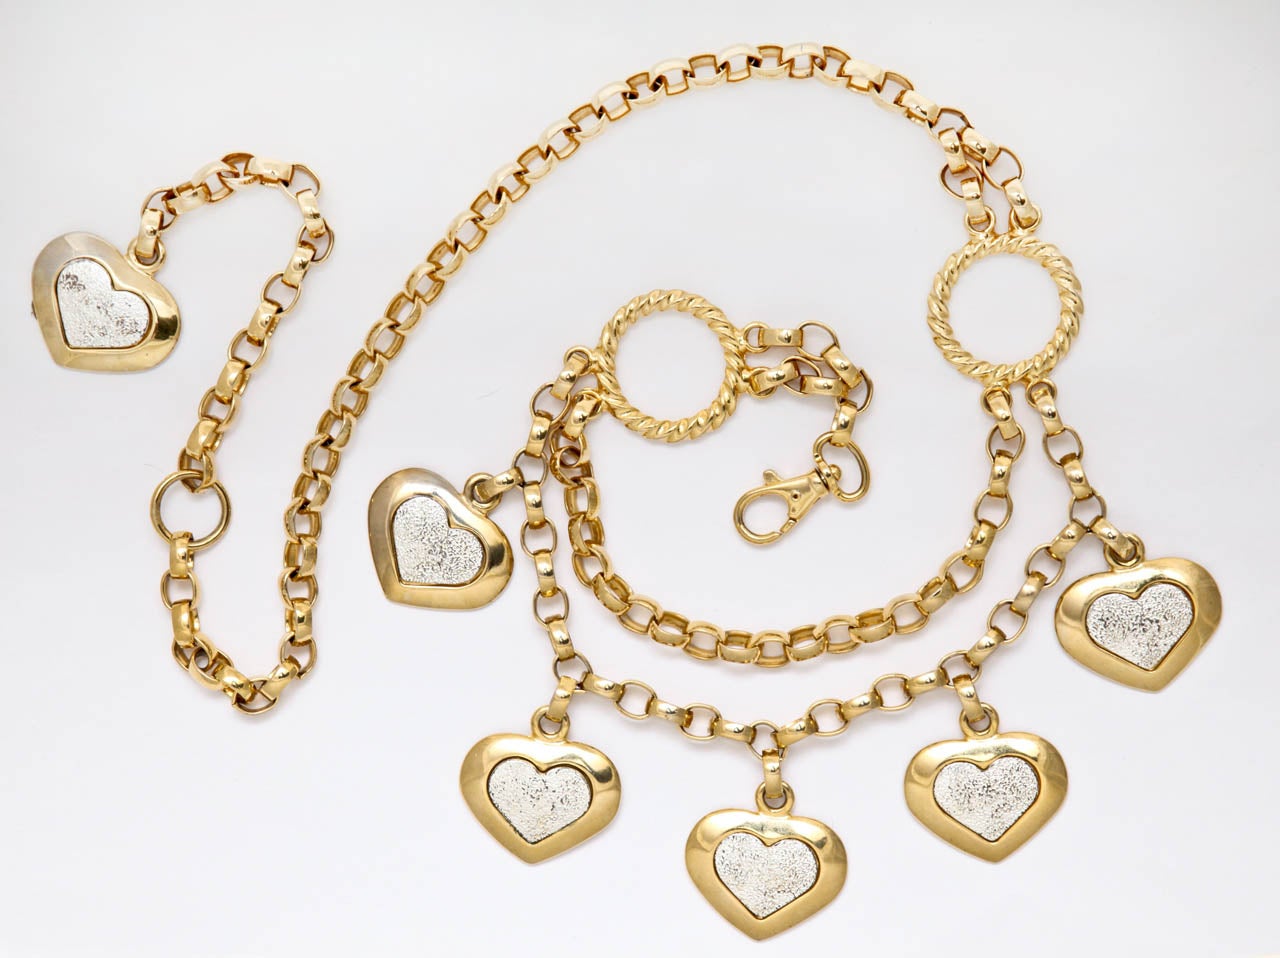 1980's goldtone Italian chain belt from Neiman Marcus. Hearts have silver- tone centers.